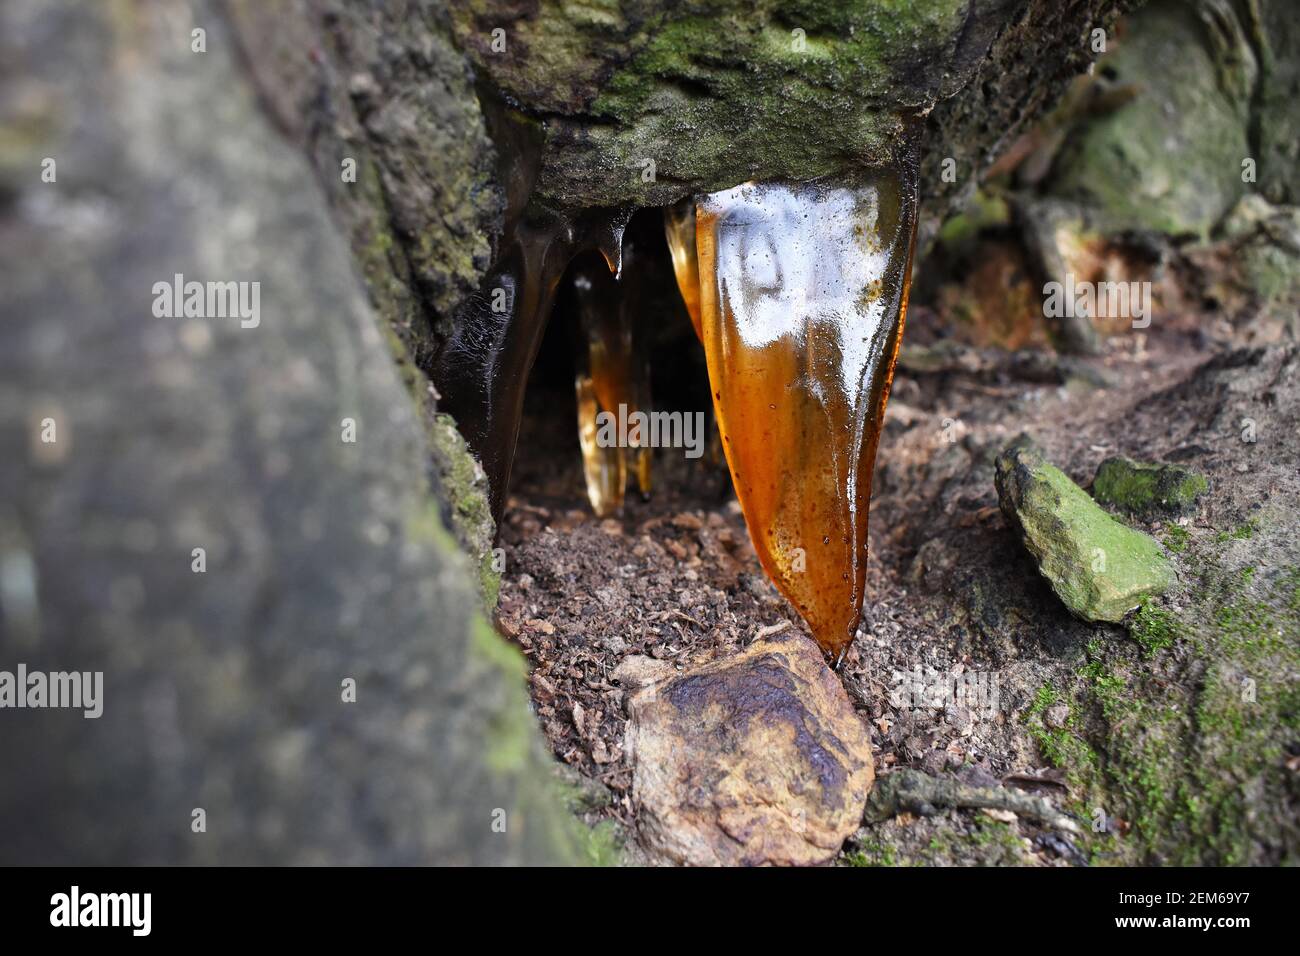 Resin leaking from underneath a tree takes the shape of icicles and are illuminated by sunlight. The amber coloured sapcicles are close to the ground. Stock Photo